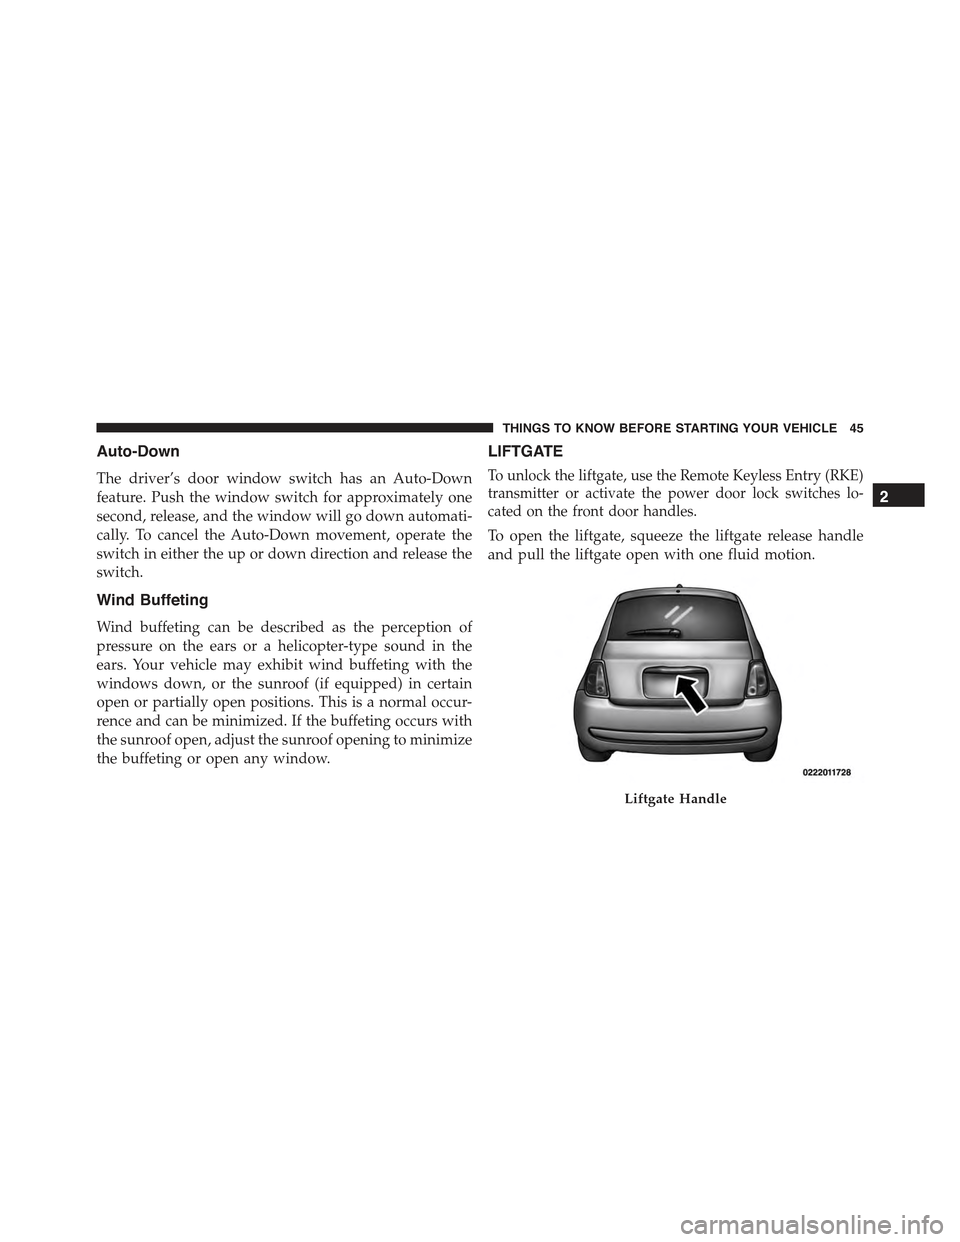 FIAT 500E 2015 2.G Owners Manual Auto-Down
The driver’s door window switch has an Auto-Down
feature. Push the window switch for approximately one
second, release, and the window will go down automati-
cally. To cancel the Auto-Down